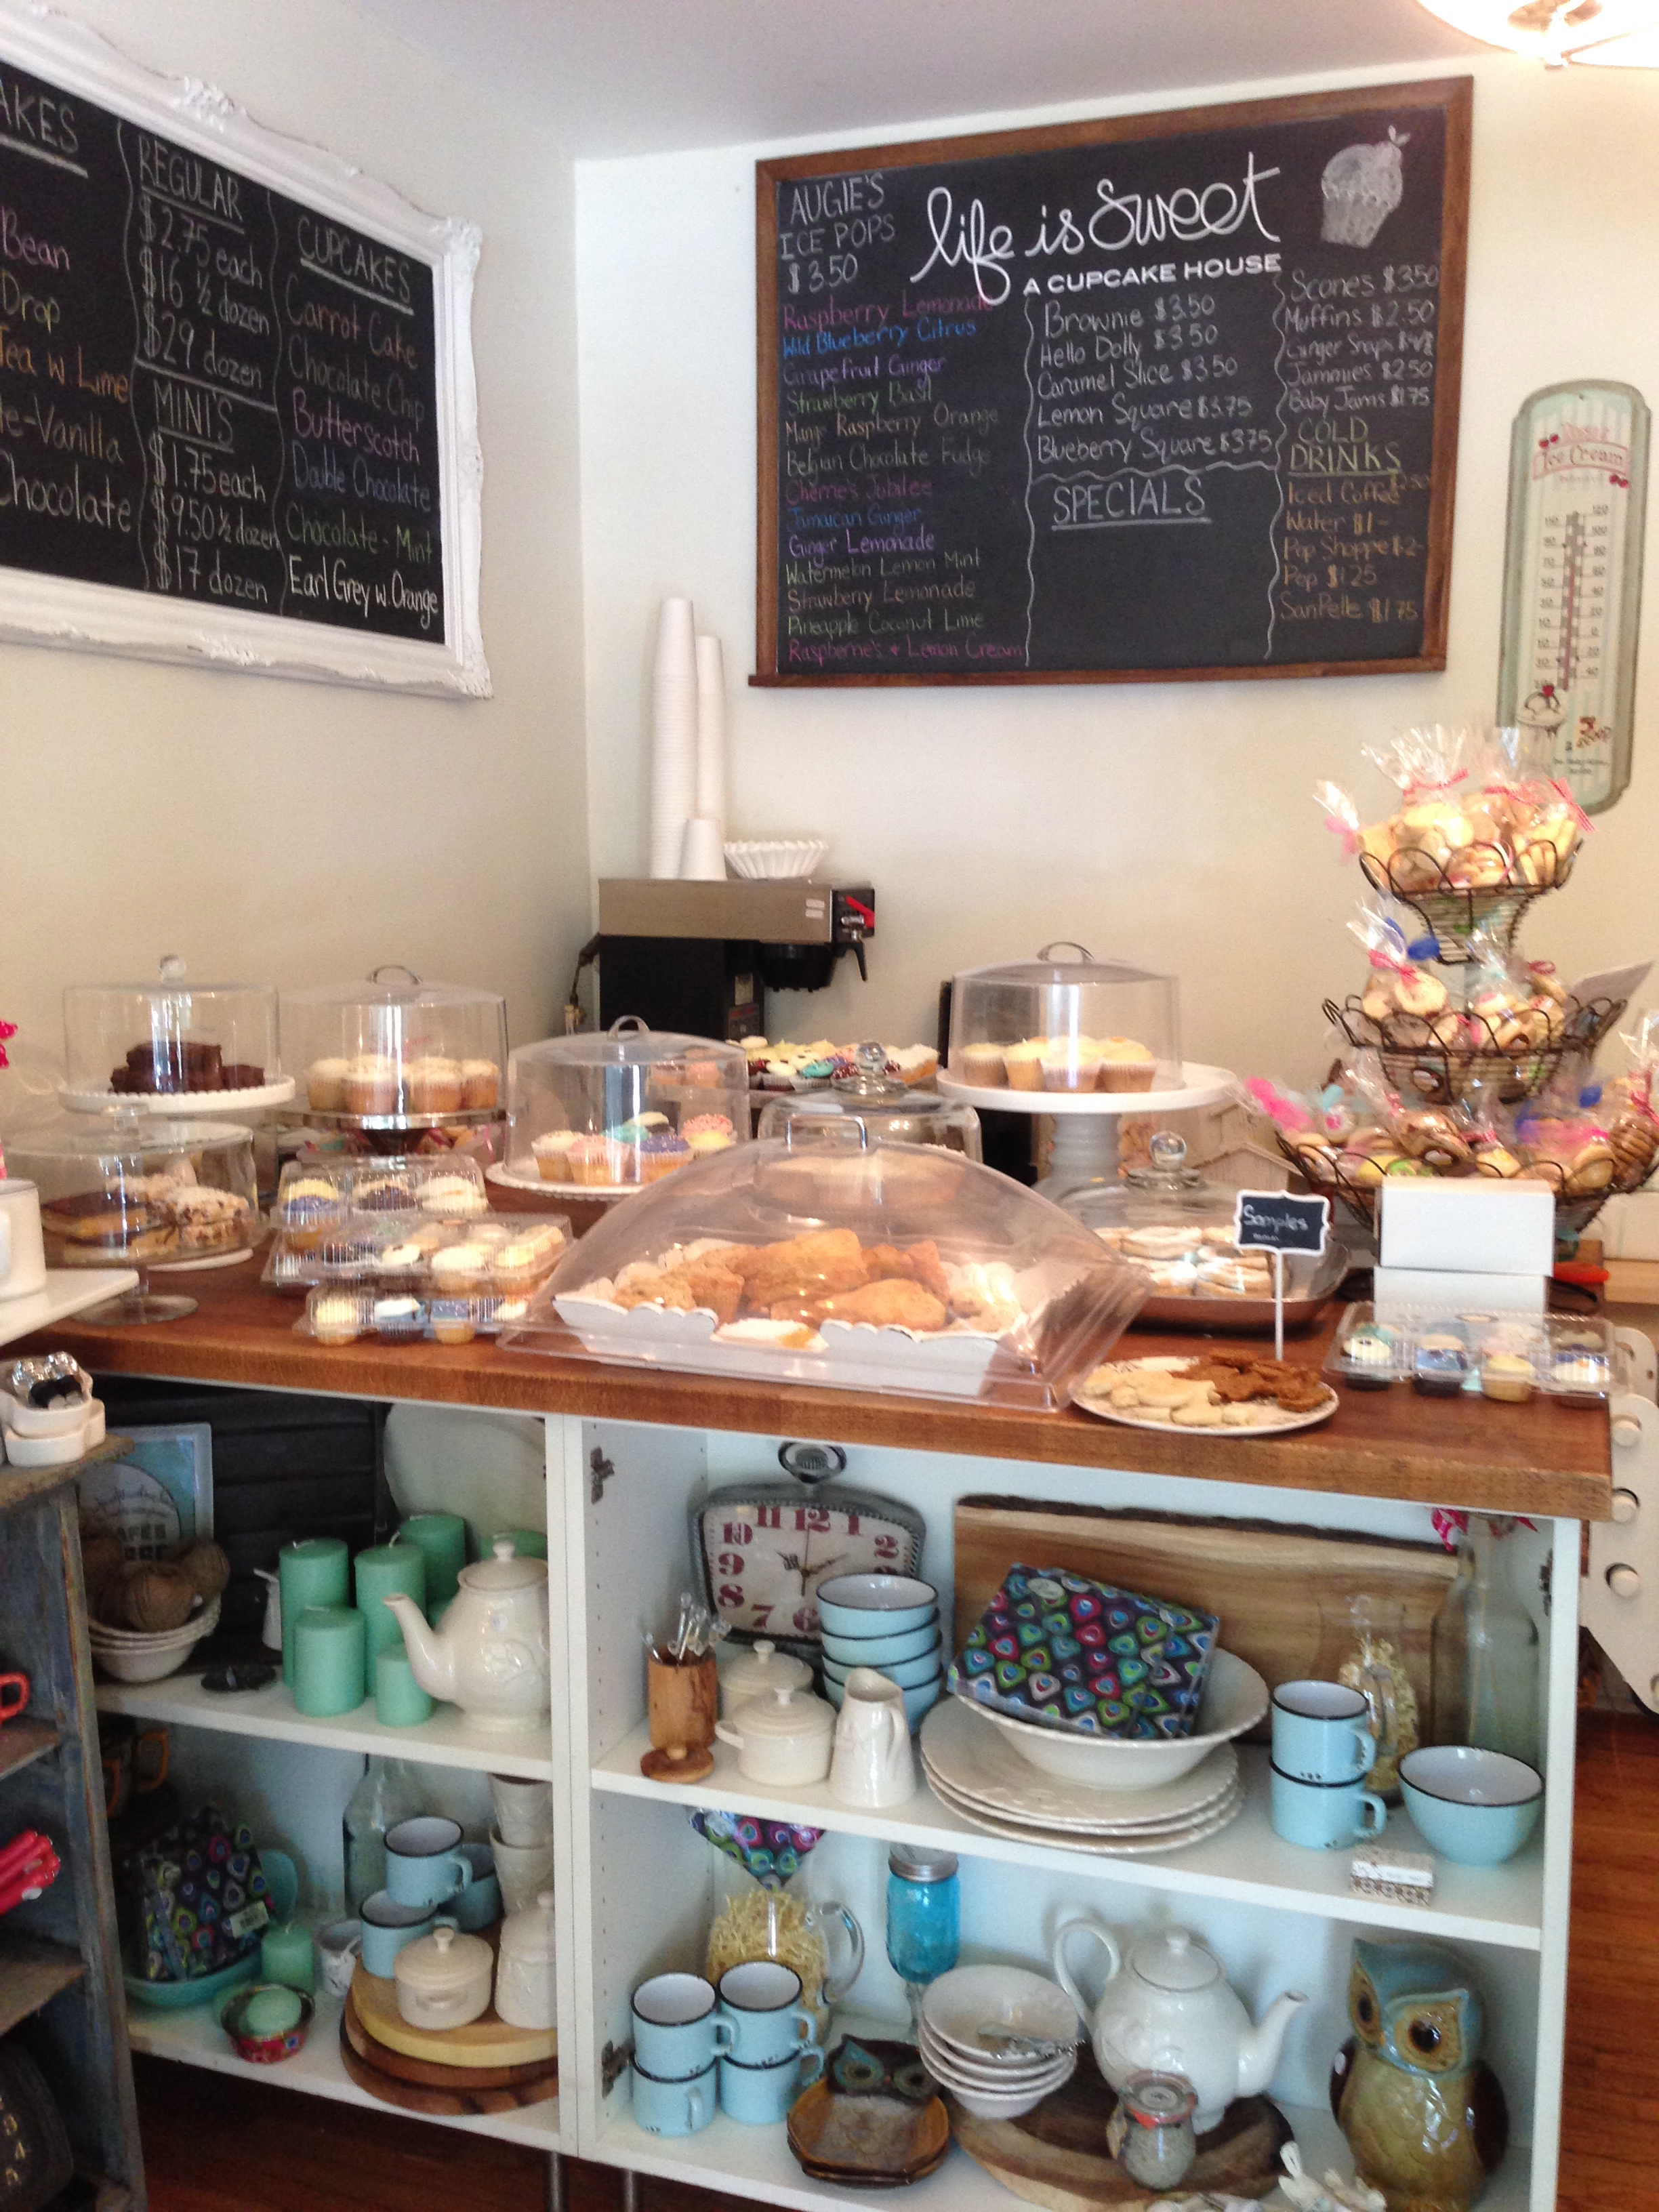 The bakery counter.